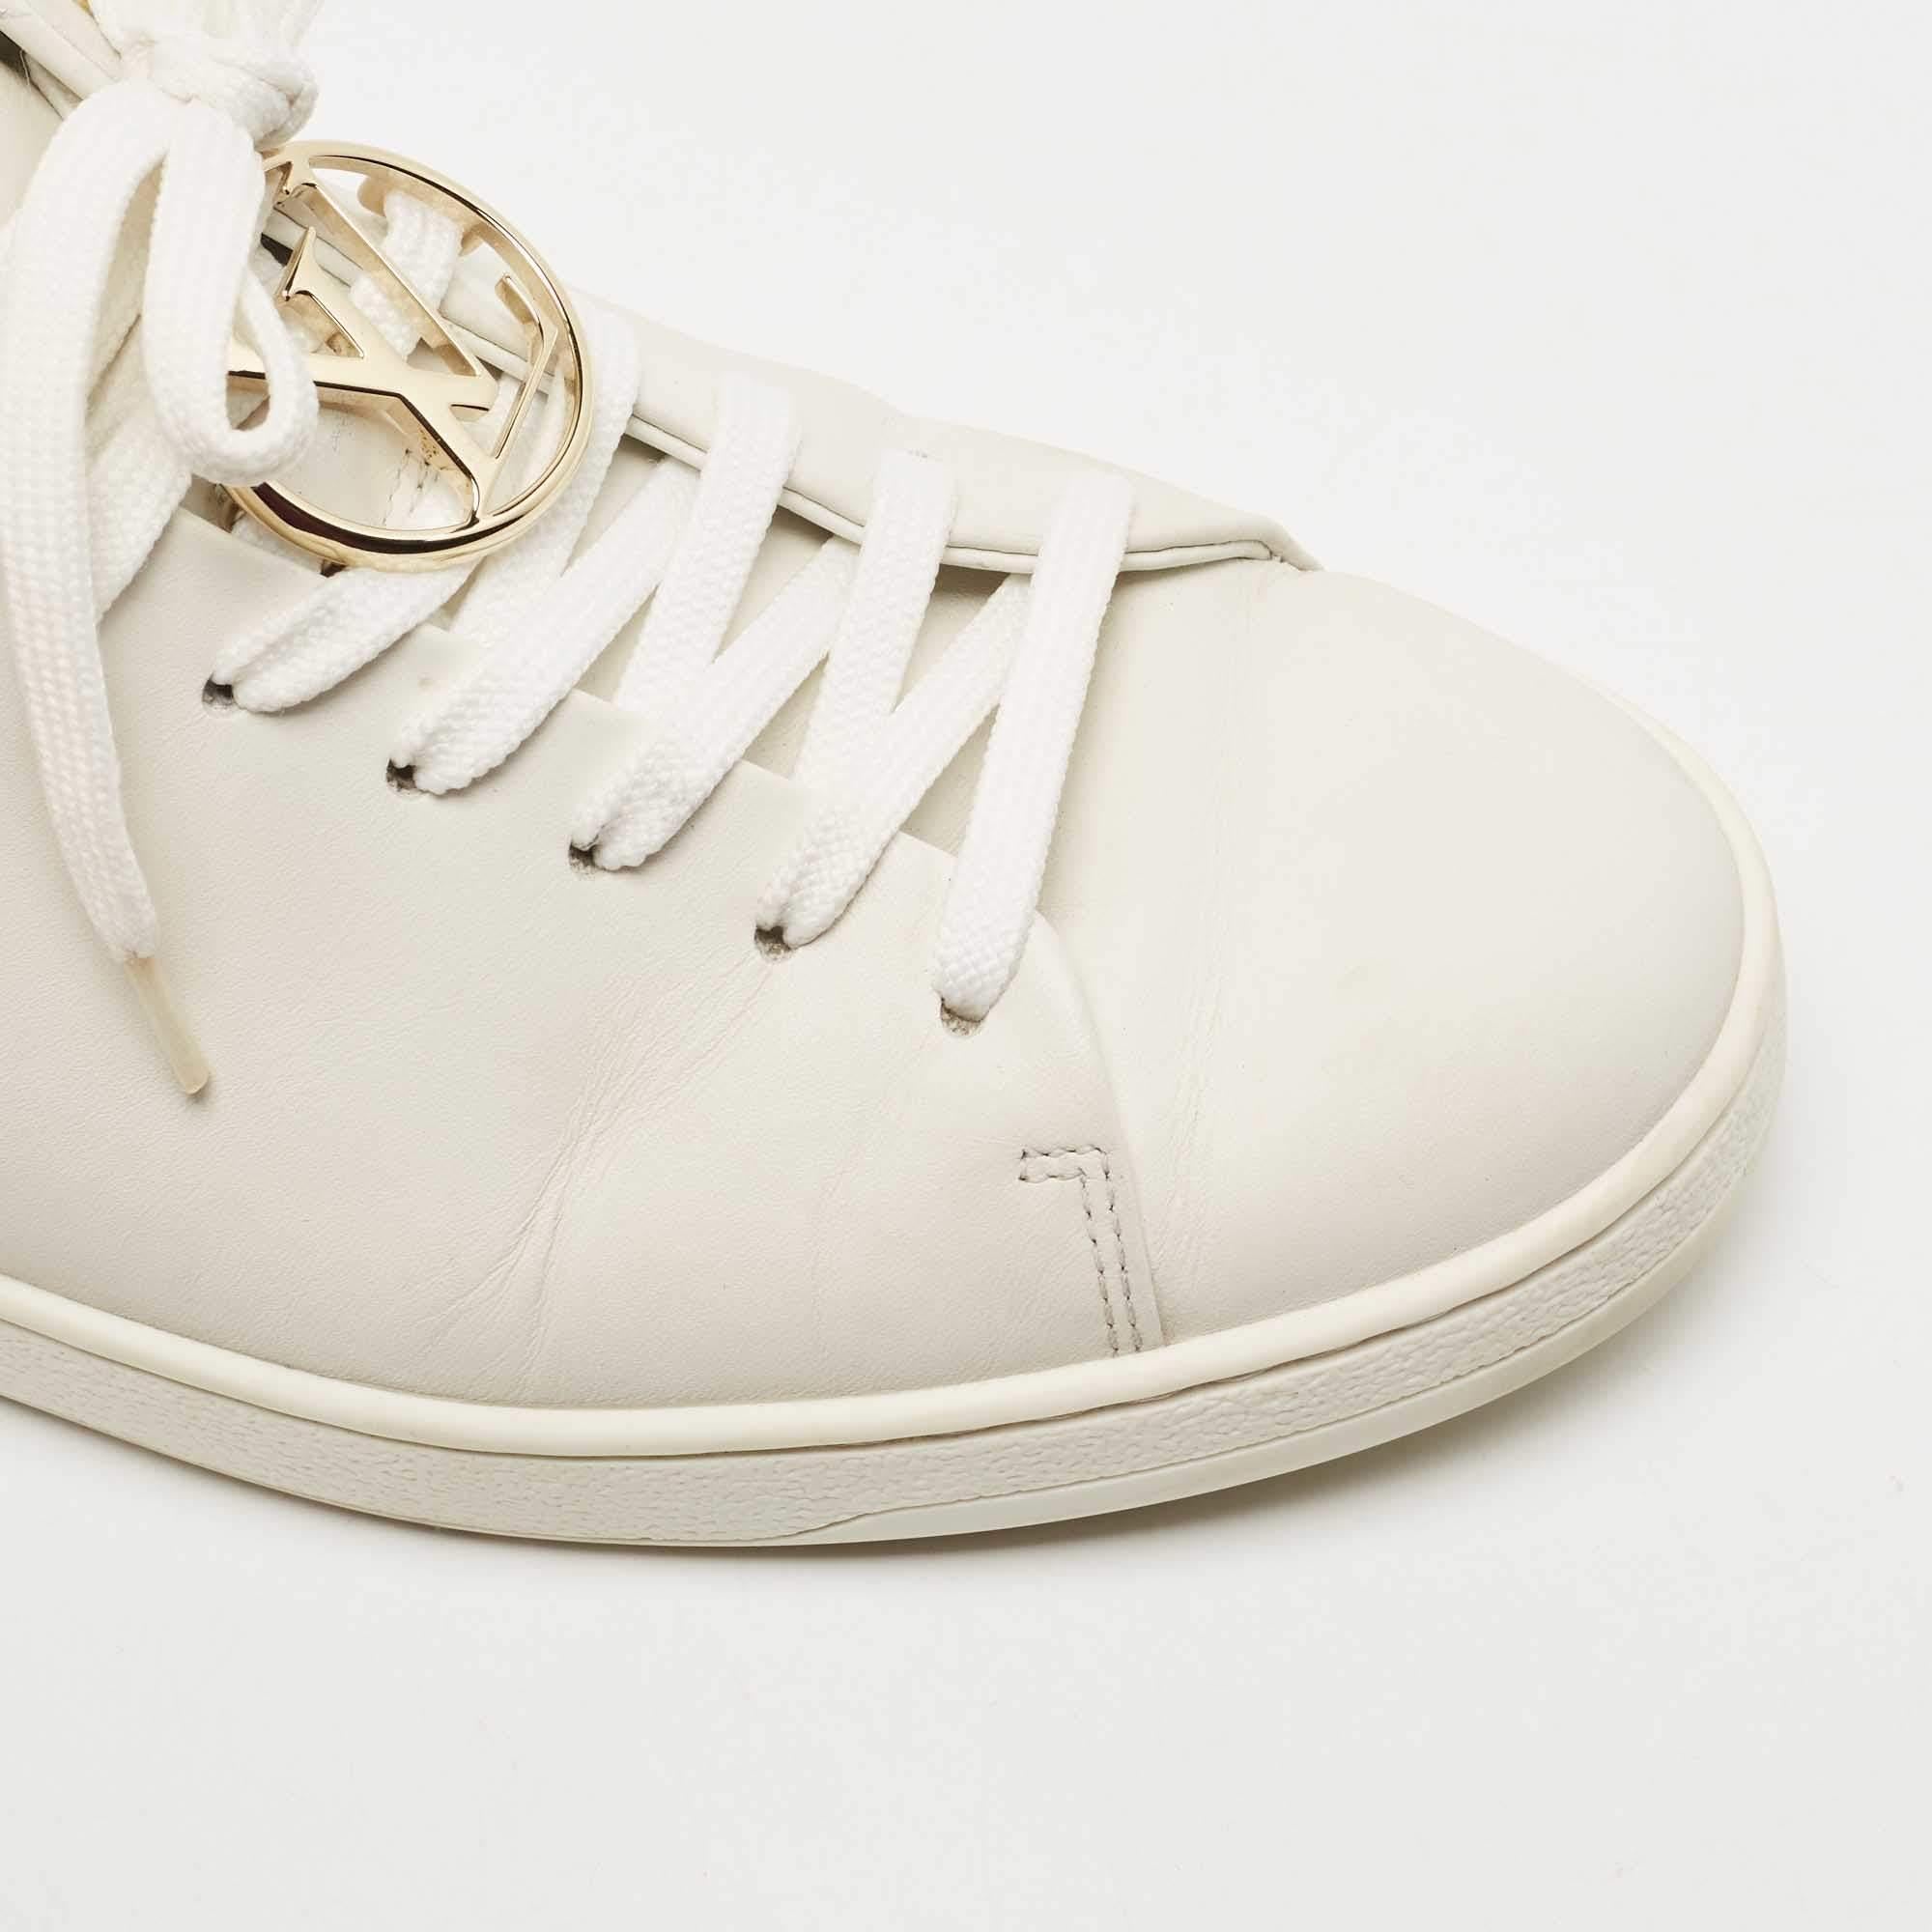 Louis Vuitton White Leather Frontrow Low Top Sneakers Size 37 2